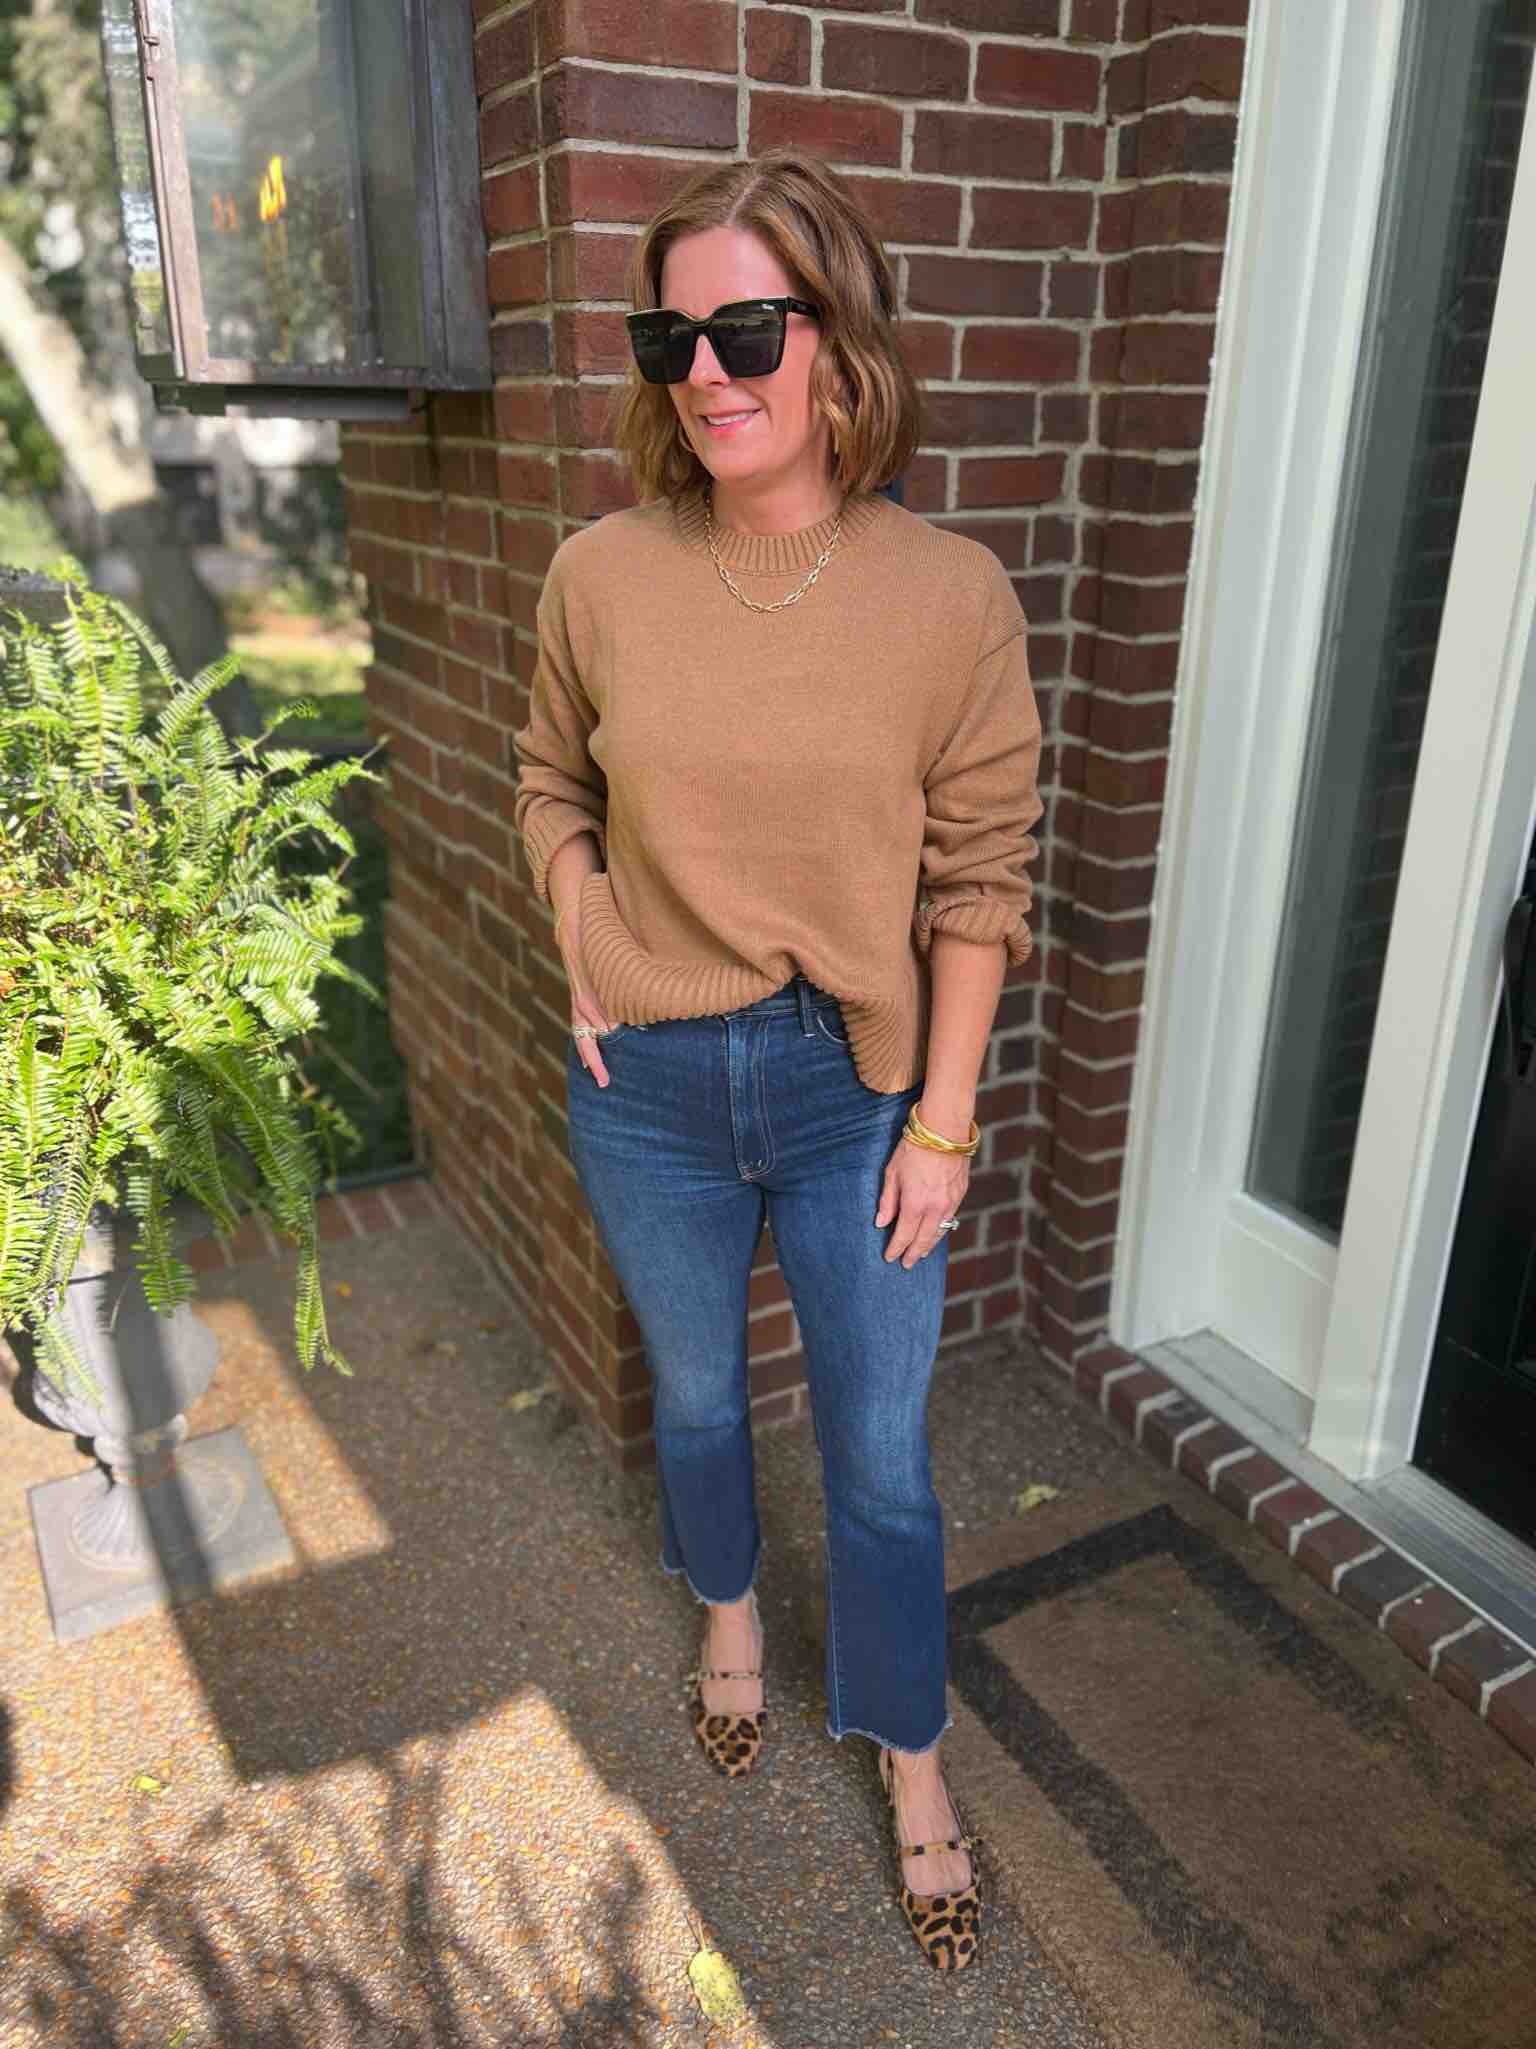 November Favorites From Our Nashville Personal Stylists Crewneck Sweater & Dark Wash Jeans how to wear a crewneck sweater with jeans how to wear animal print shoes with jeans